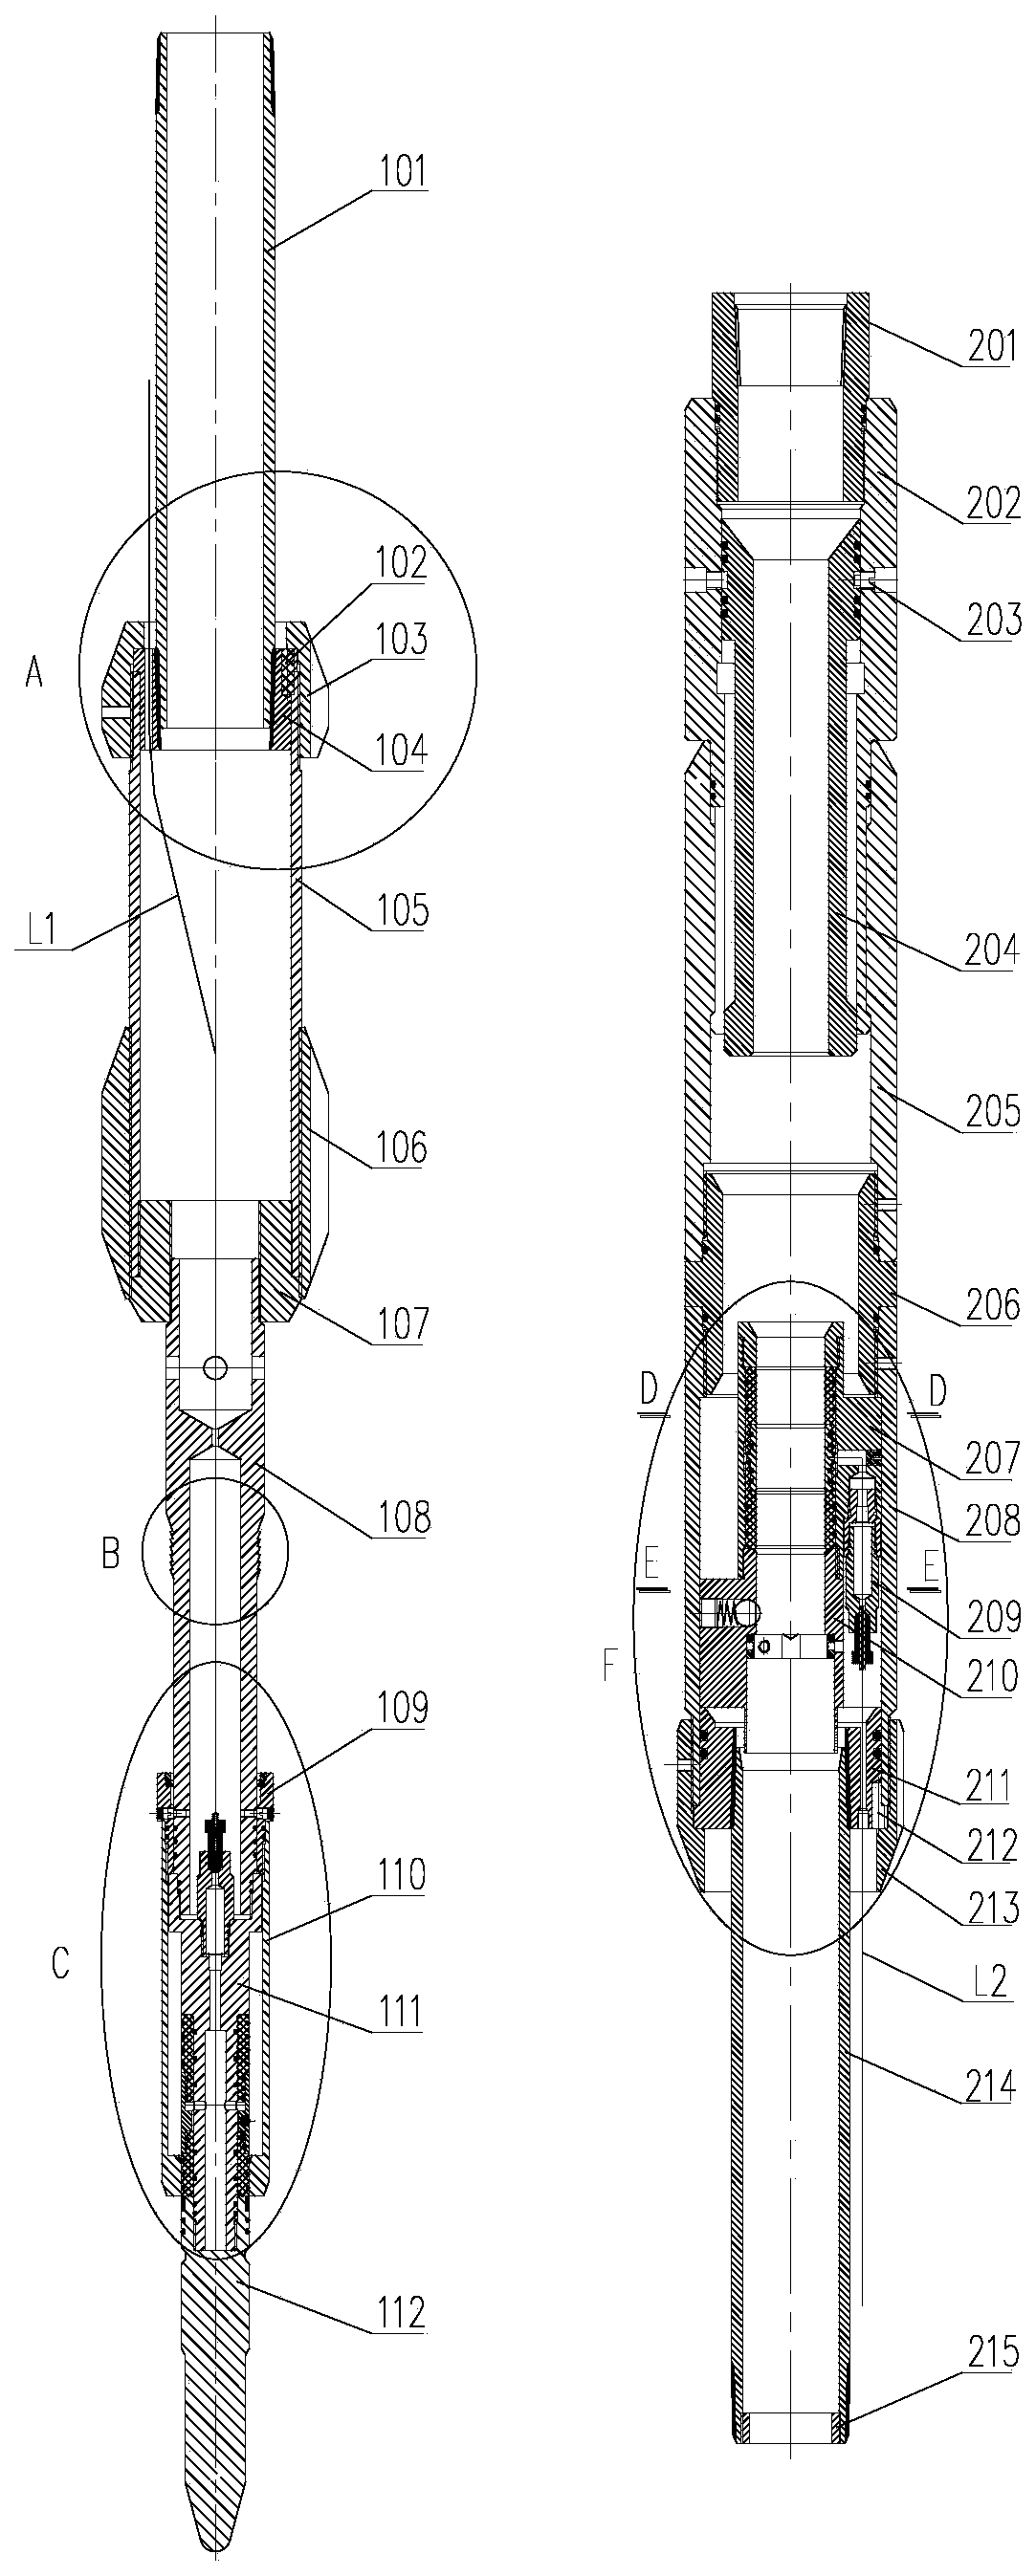 Under-well cable wet type butt-joint device for oil well